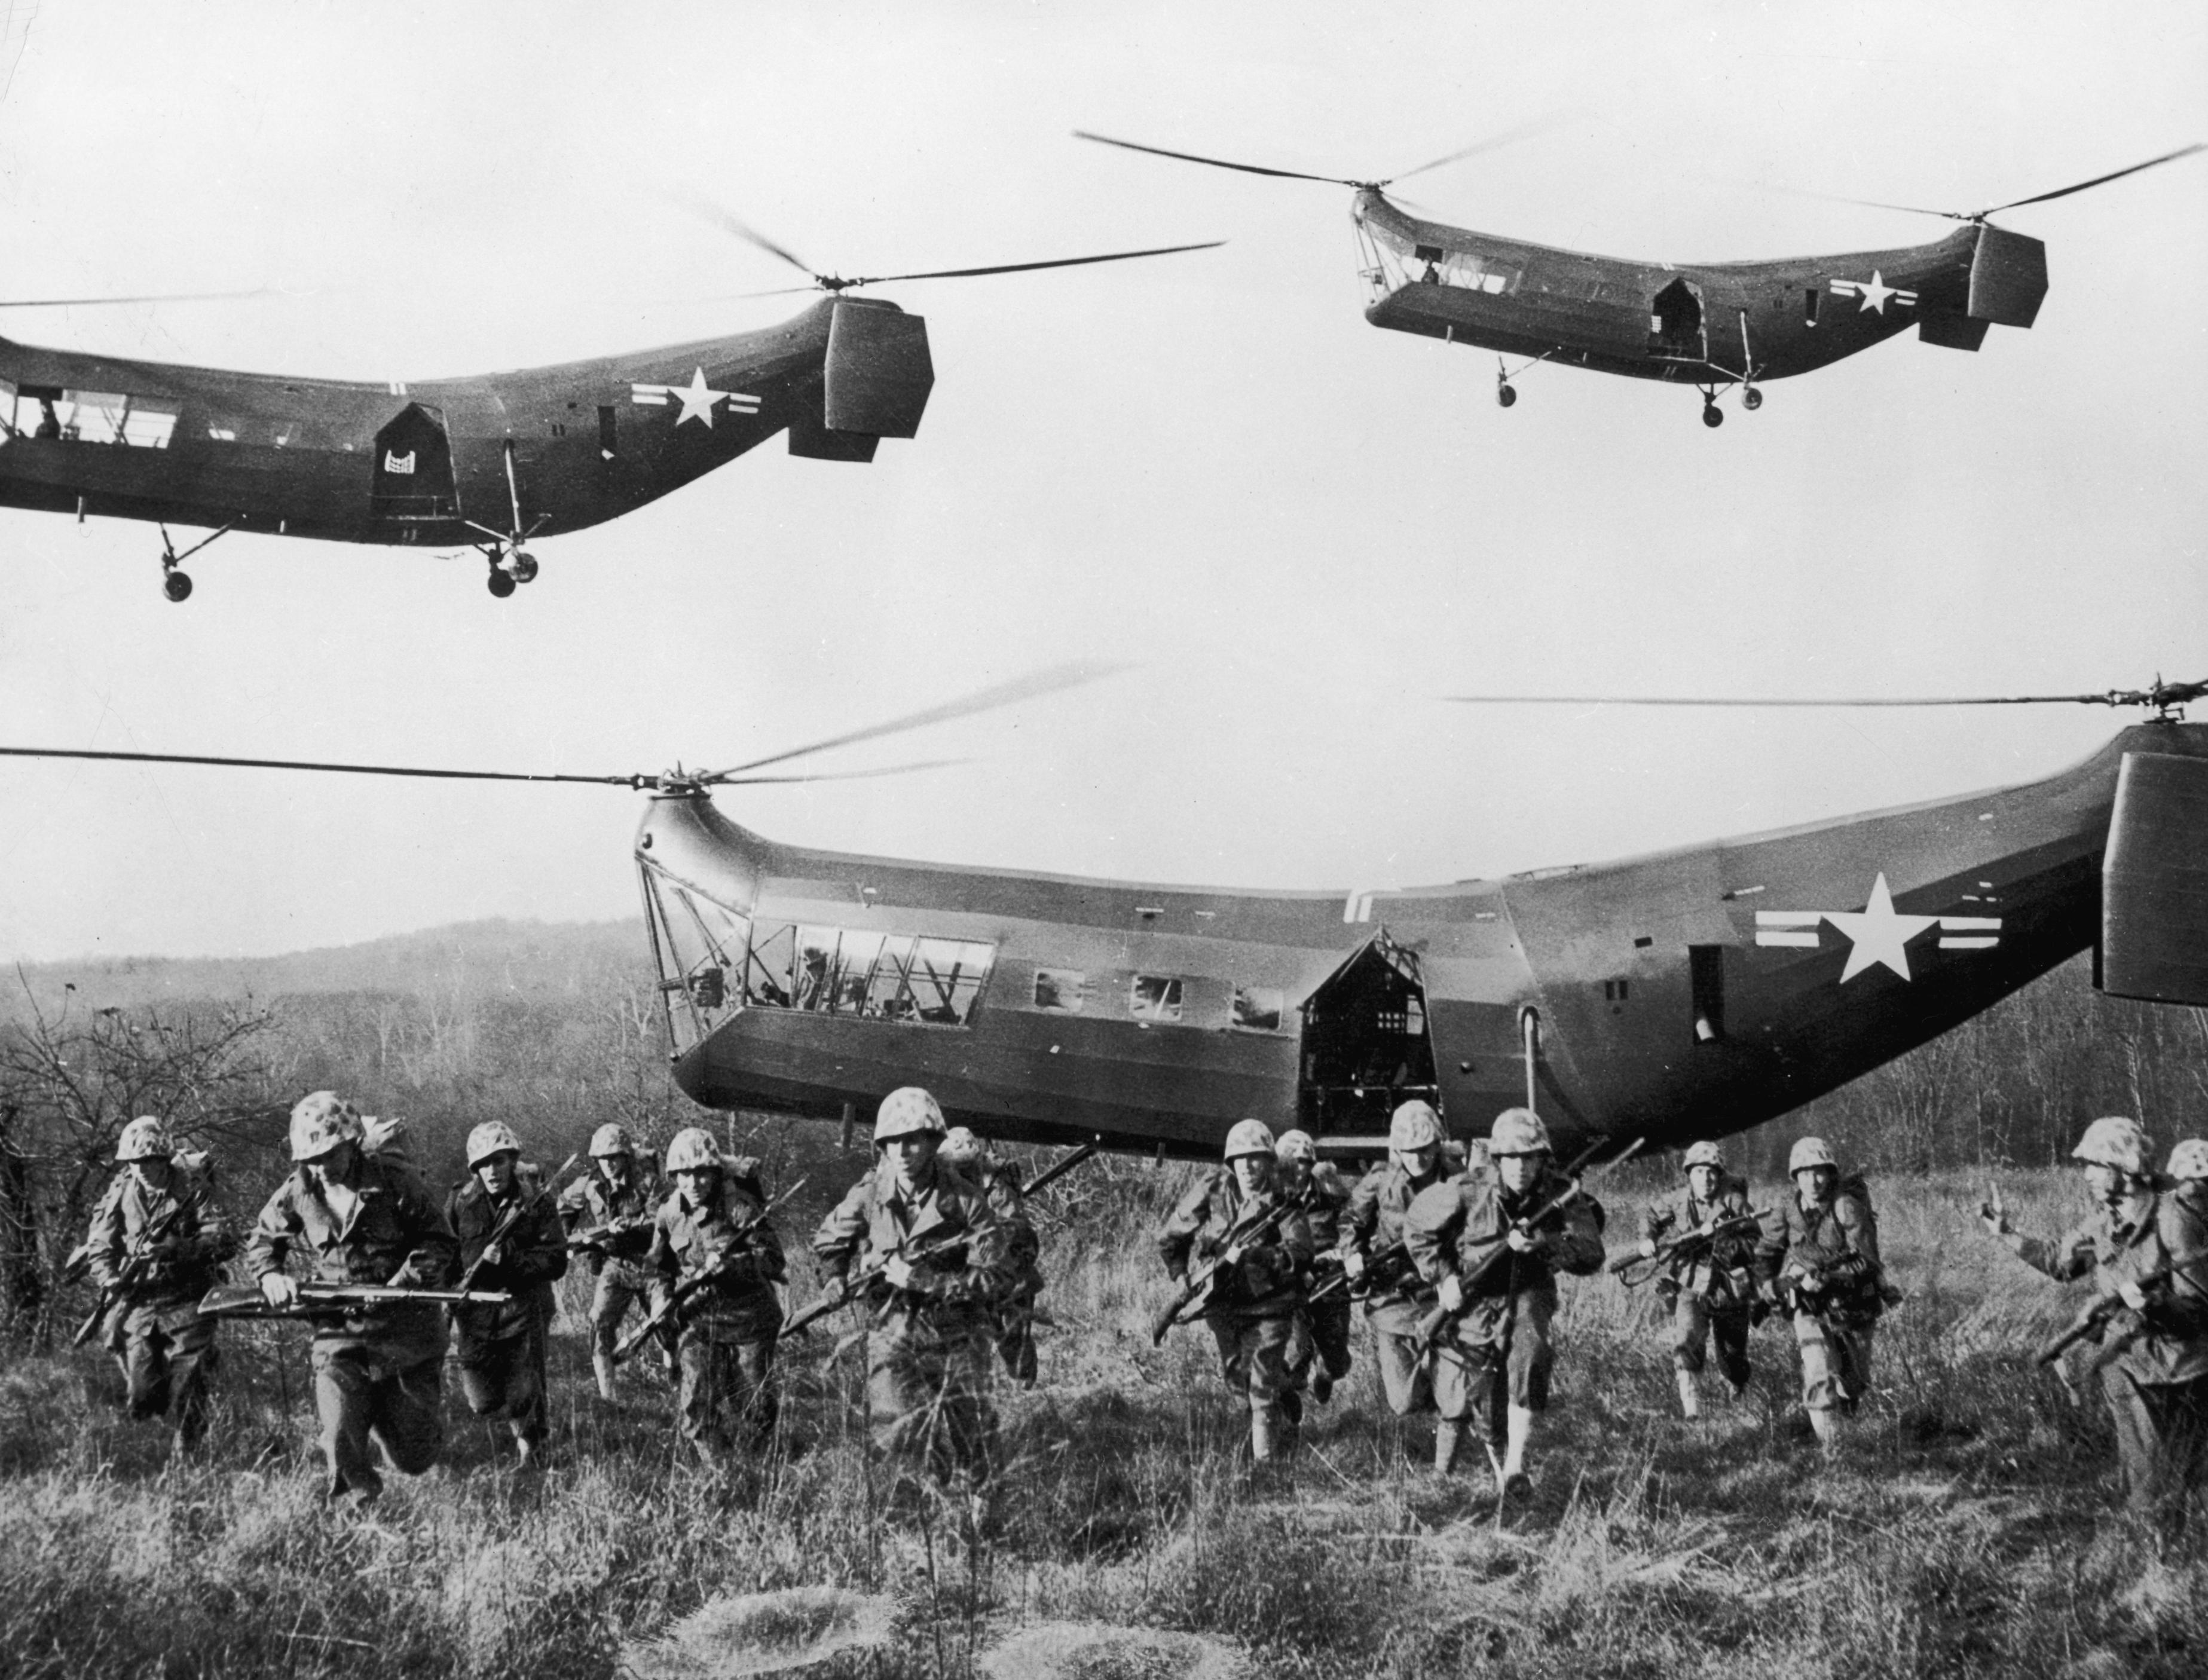 U.S. troops emerge from tandem helicopters onto an open field during the Korean War. (Hulton Archiv—Getty Images)